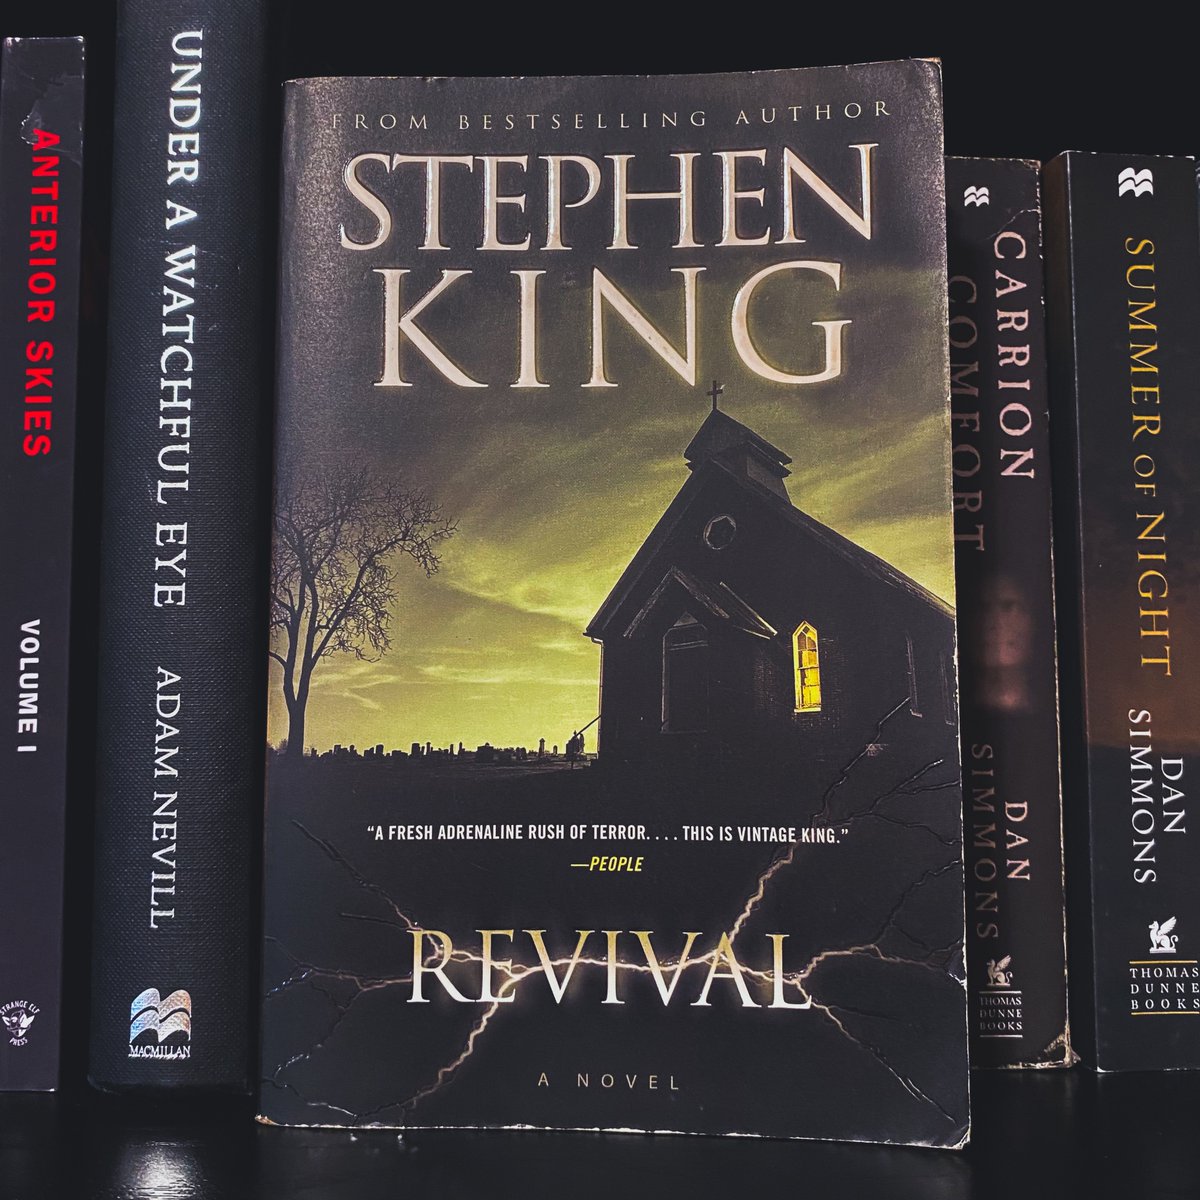 One of Stephen King’s most underrated, under-appreciated novels, and his last really good novel (in my opinion). It’s been many years since I’ve read this, but it’s definitely due for a reread.

#stephenking #constantreader #cosmichorror #lovecraftian #allthingsservethebeam